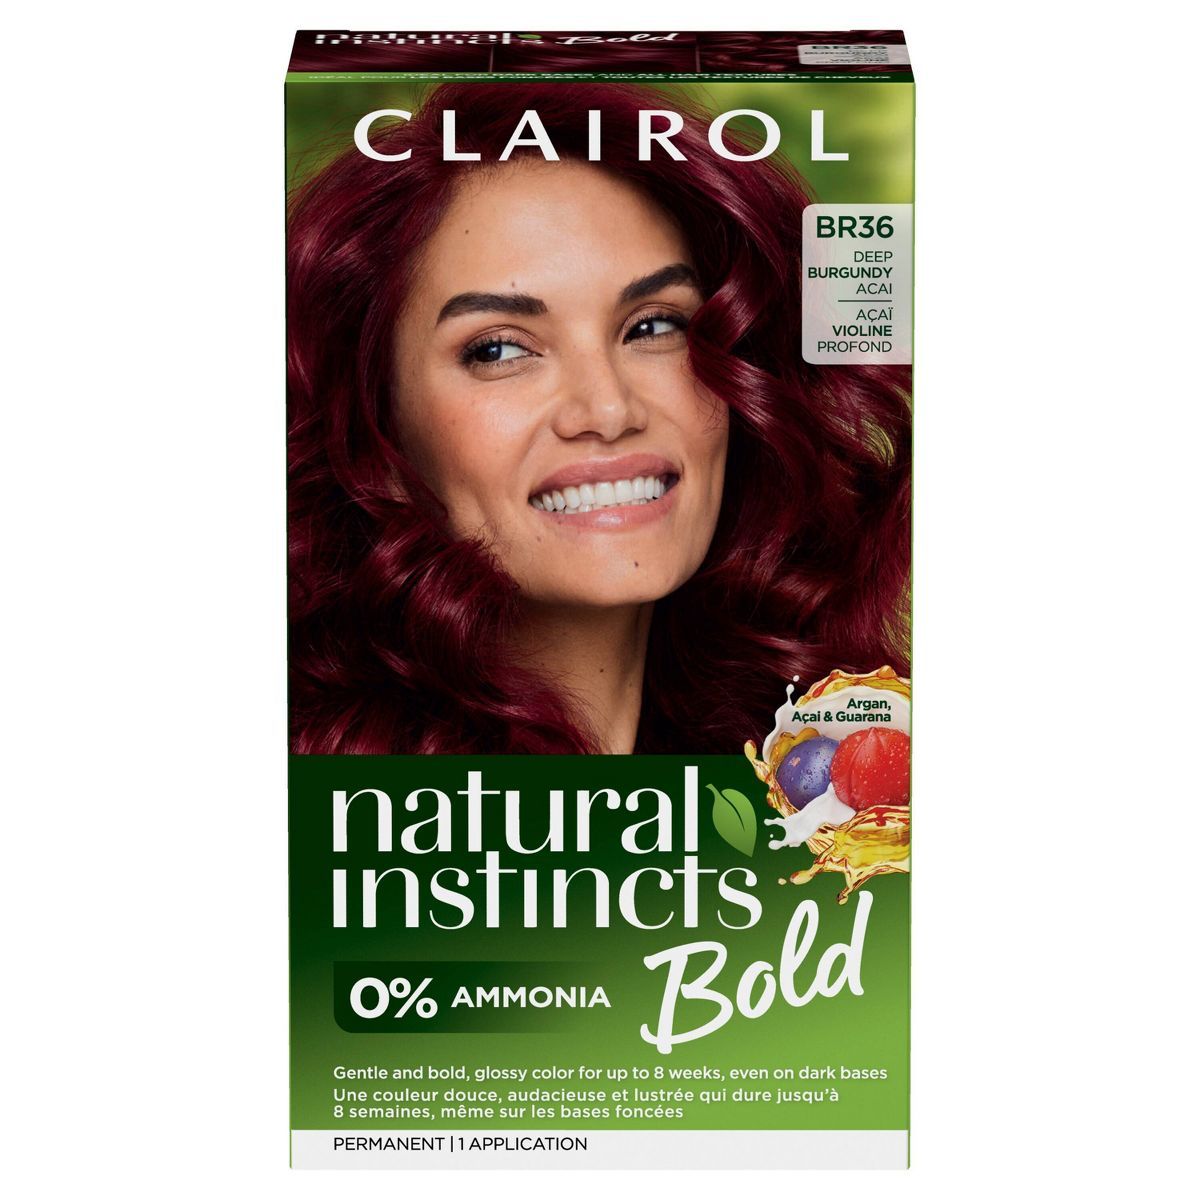 Natural Instincts Clairol Permanent Hair Color Bold Kit | Target